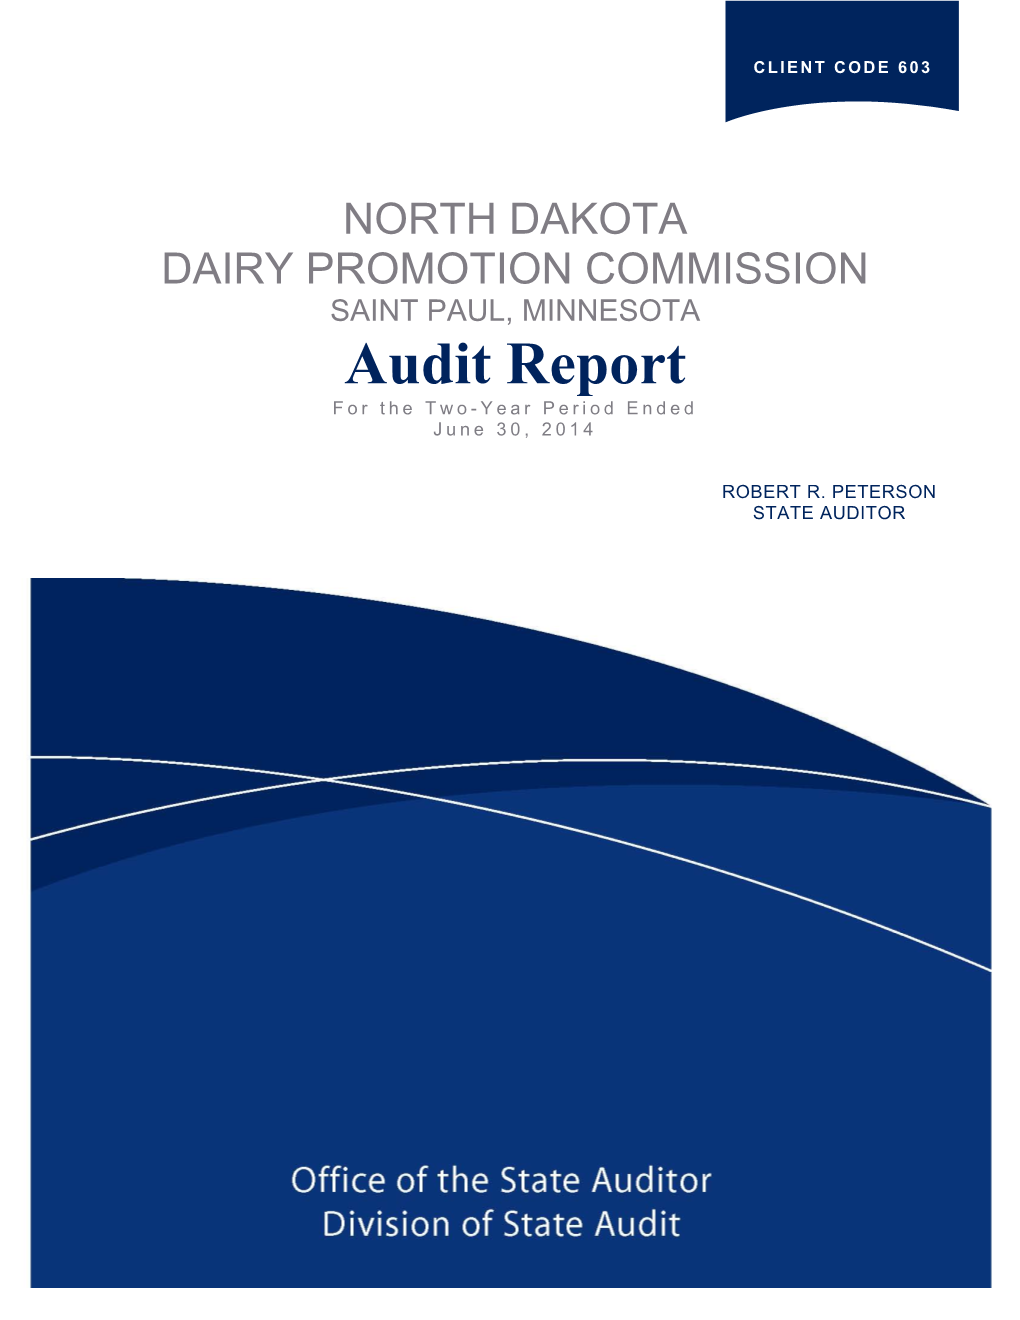 Audit Report for the Two-Year Period Ended June 30, 2014